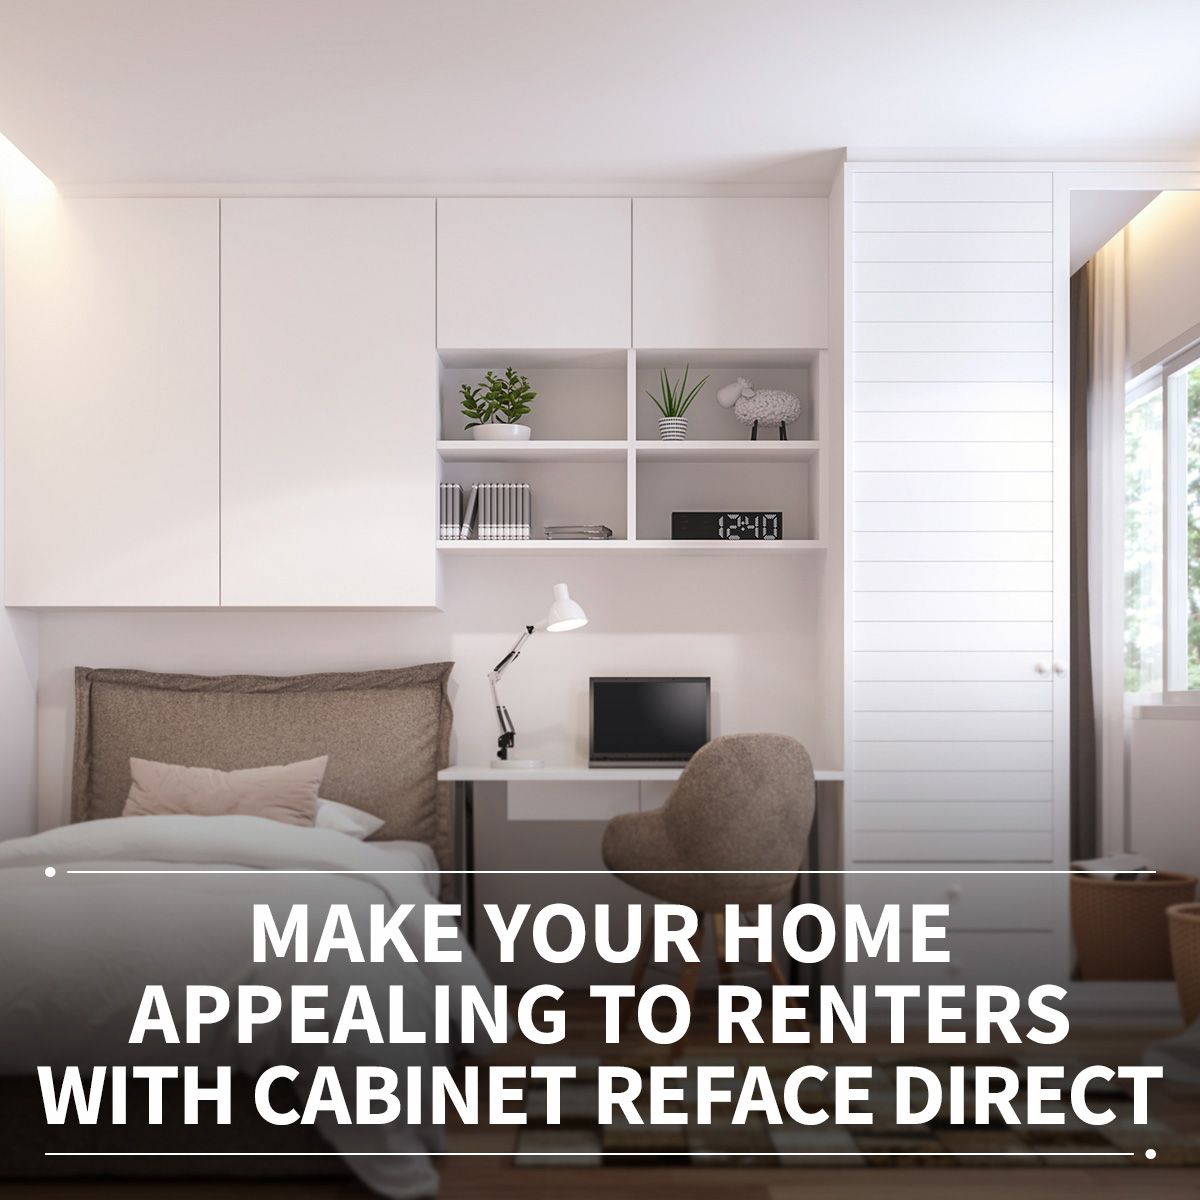 Make Your Home Appealing to Renters With Cabinet Reface Direct